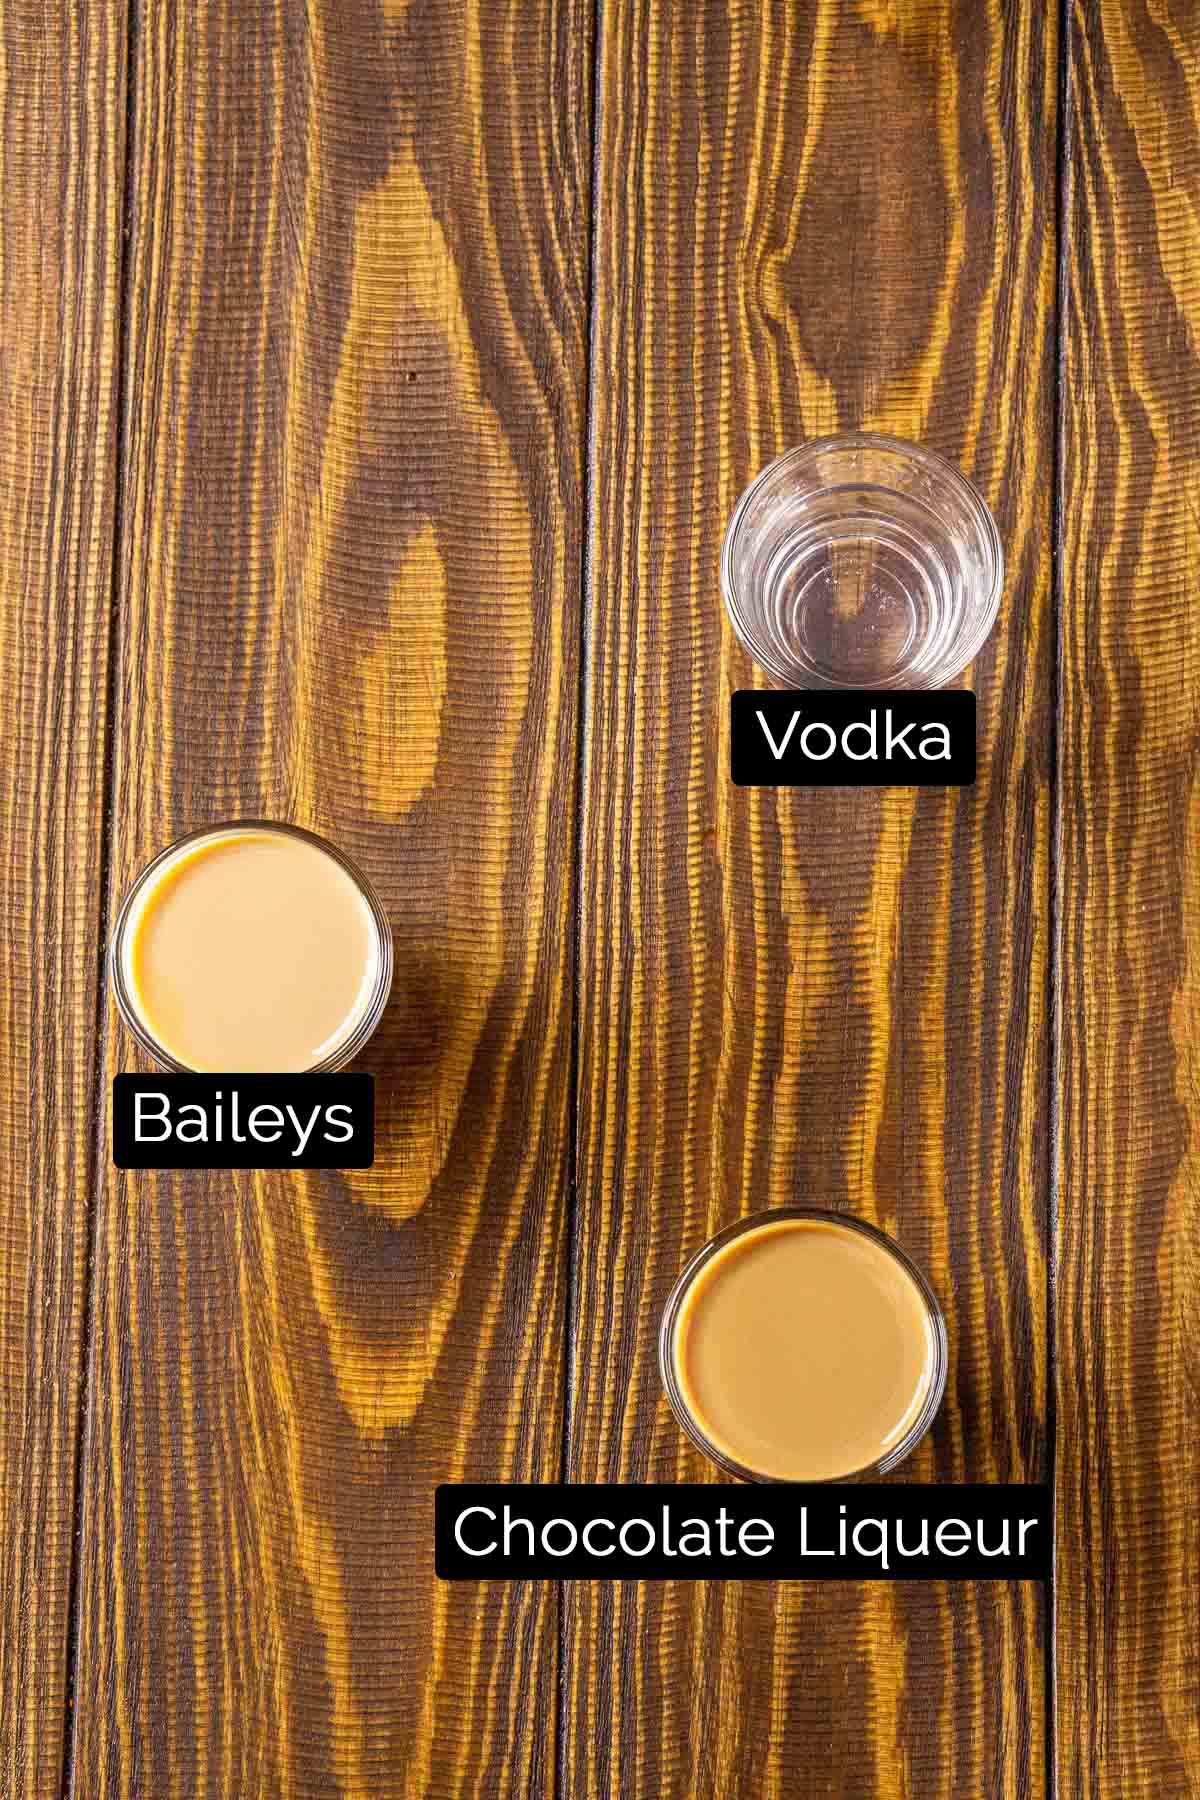 The Baileys chocolate martini ingredients with labels on a wooden board.